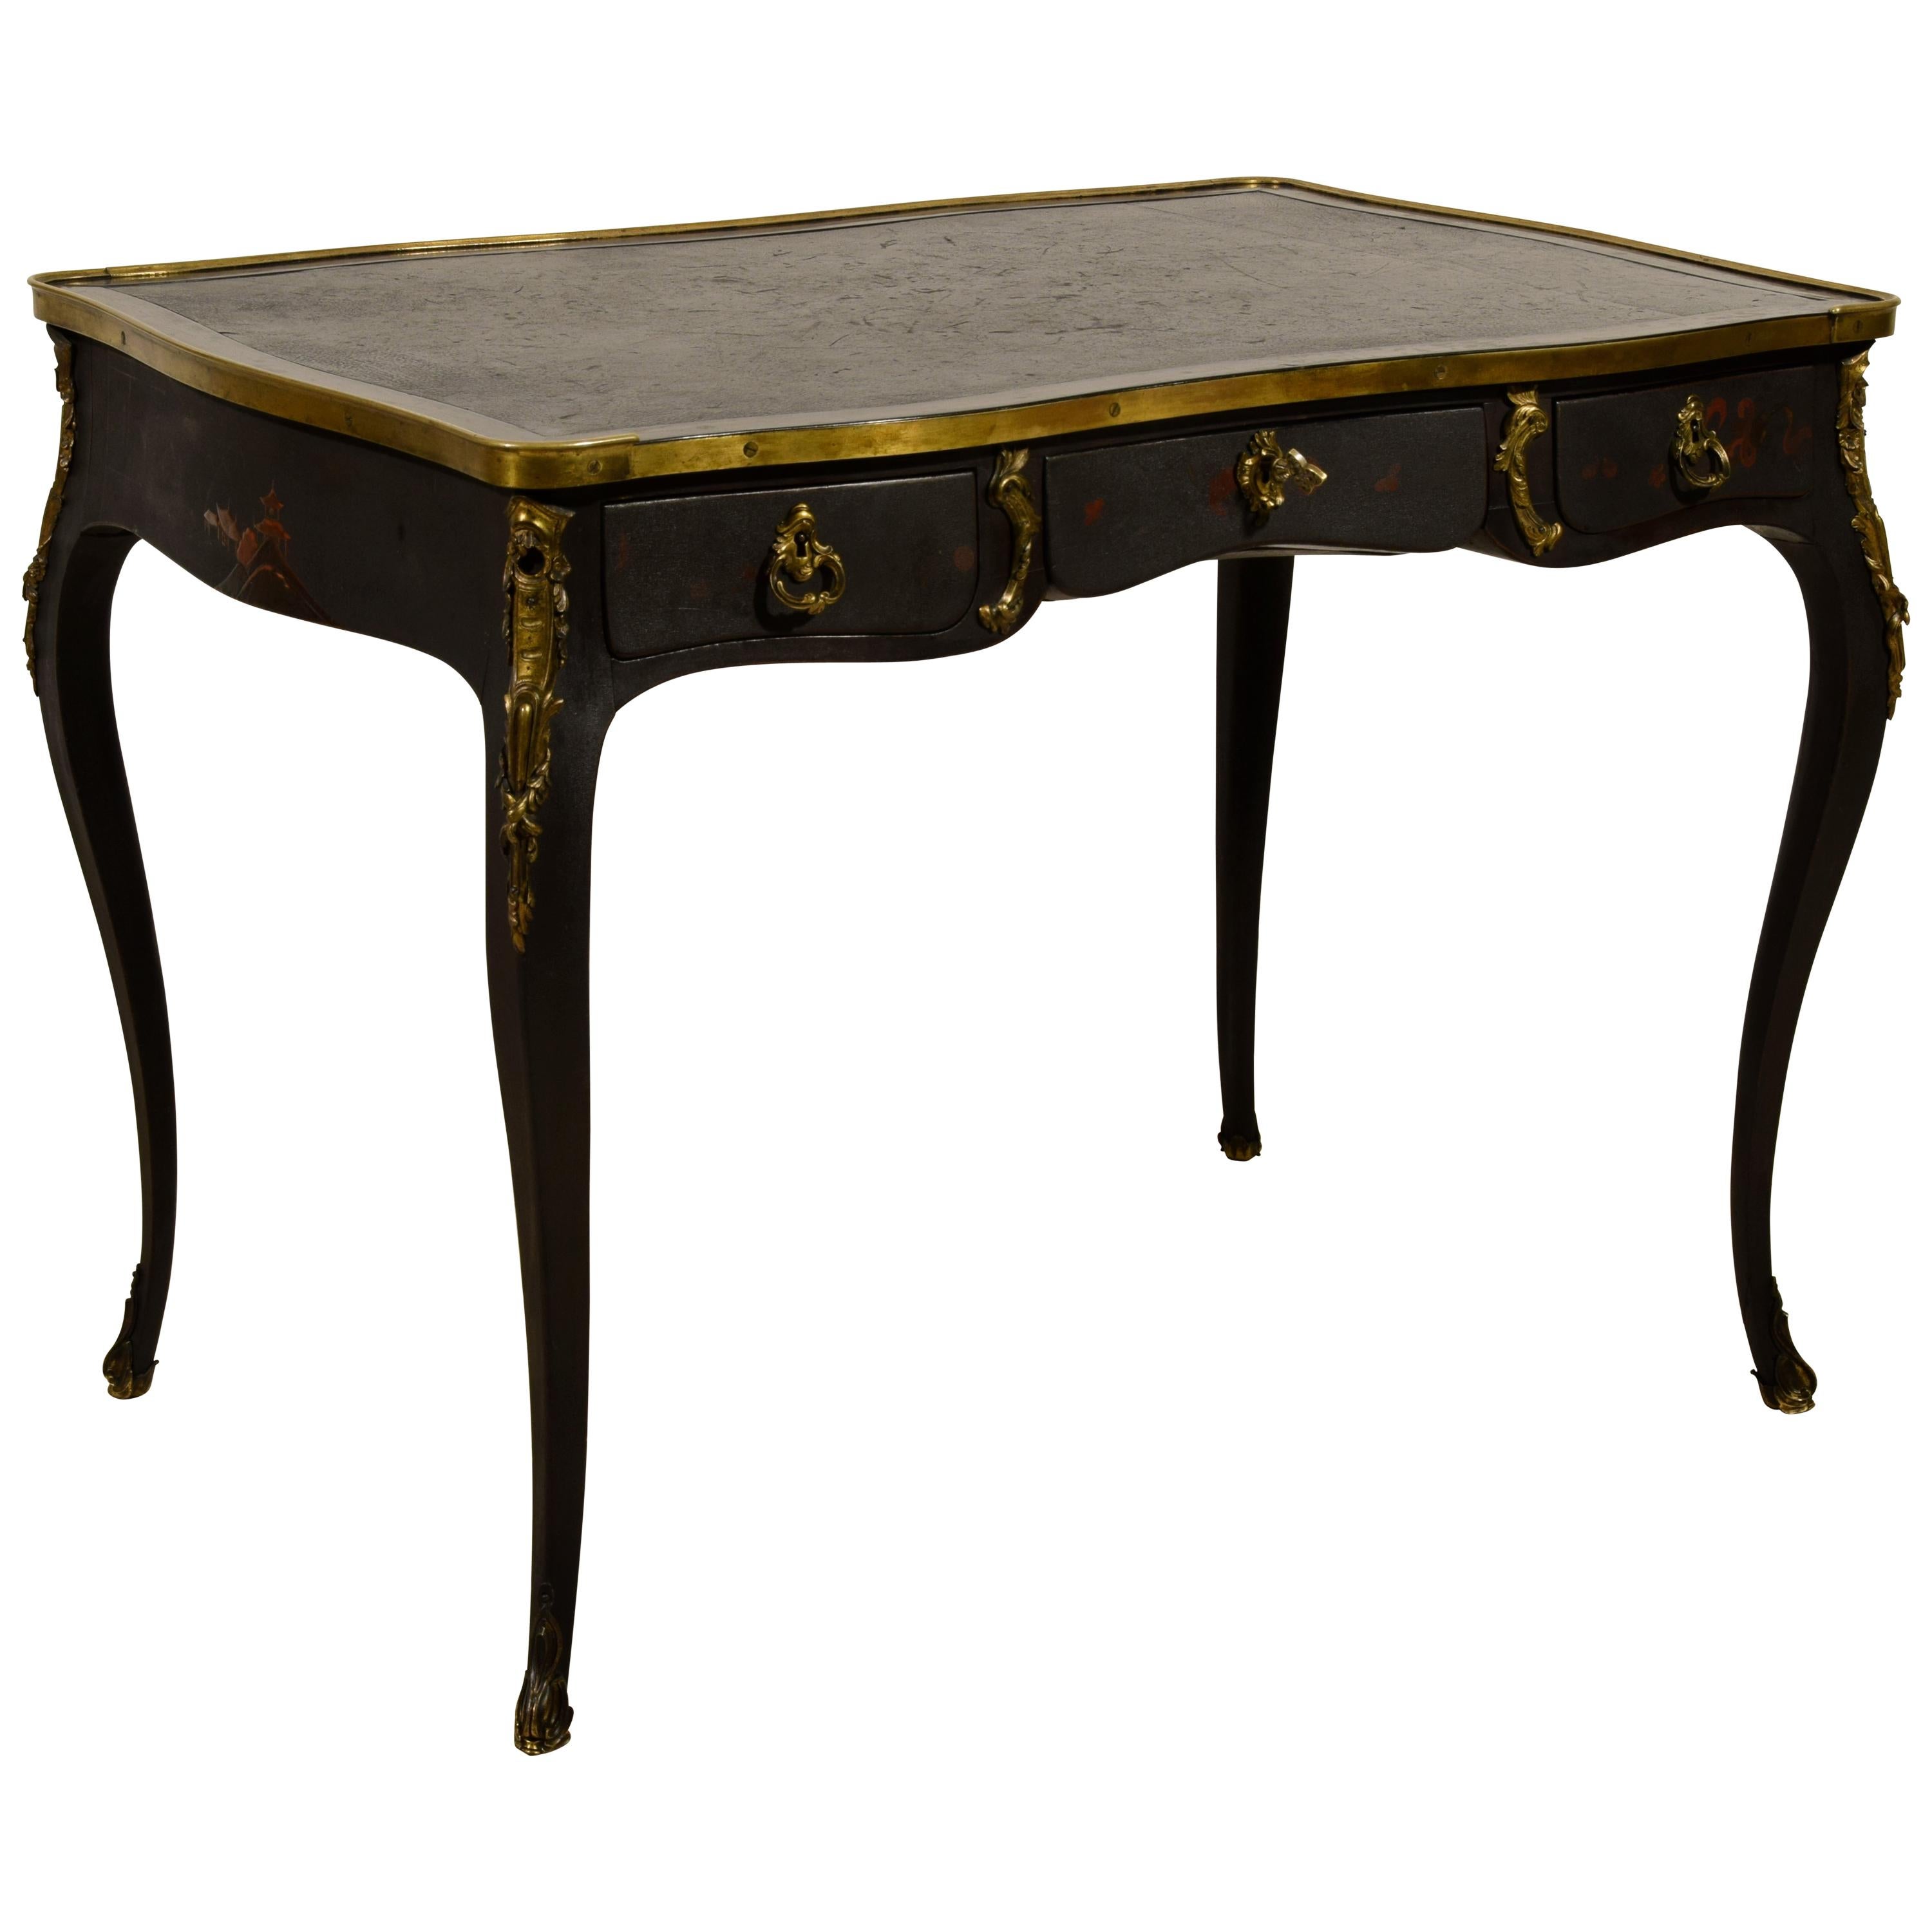 19th Century, French Louis XV Style, Lacquered Wood Desk